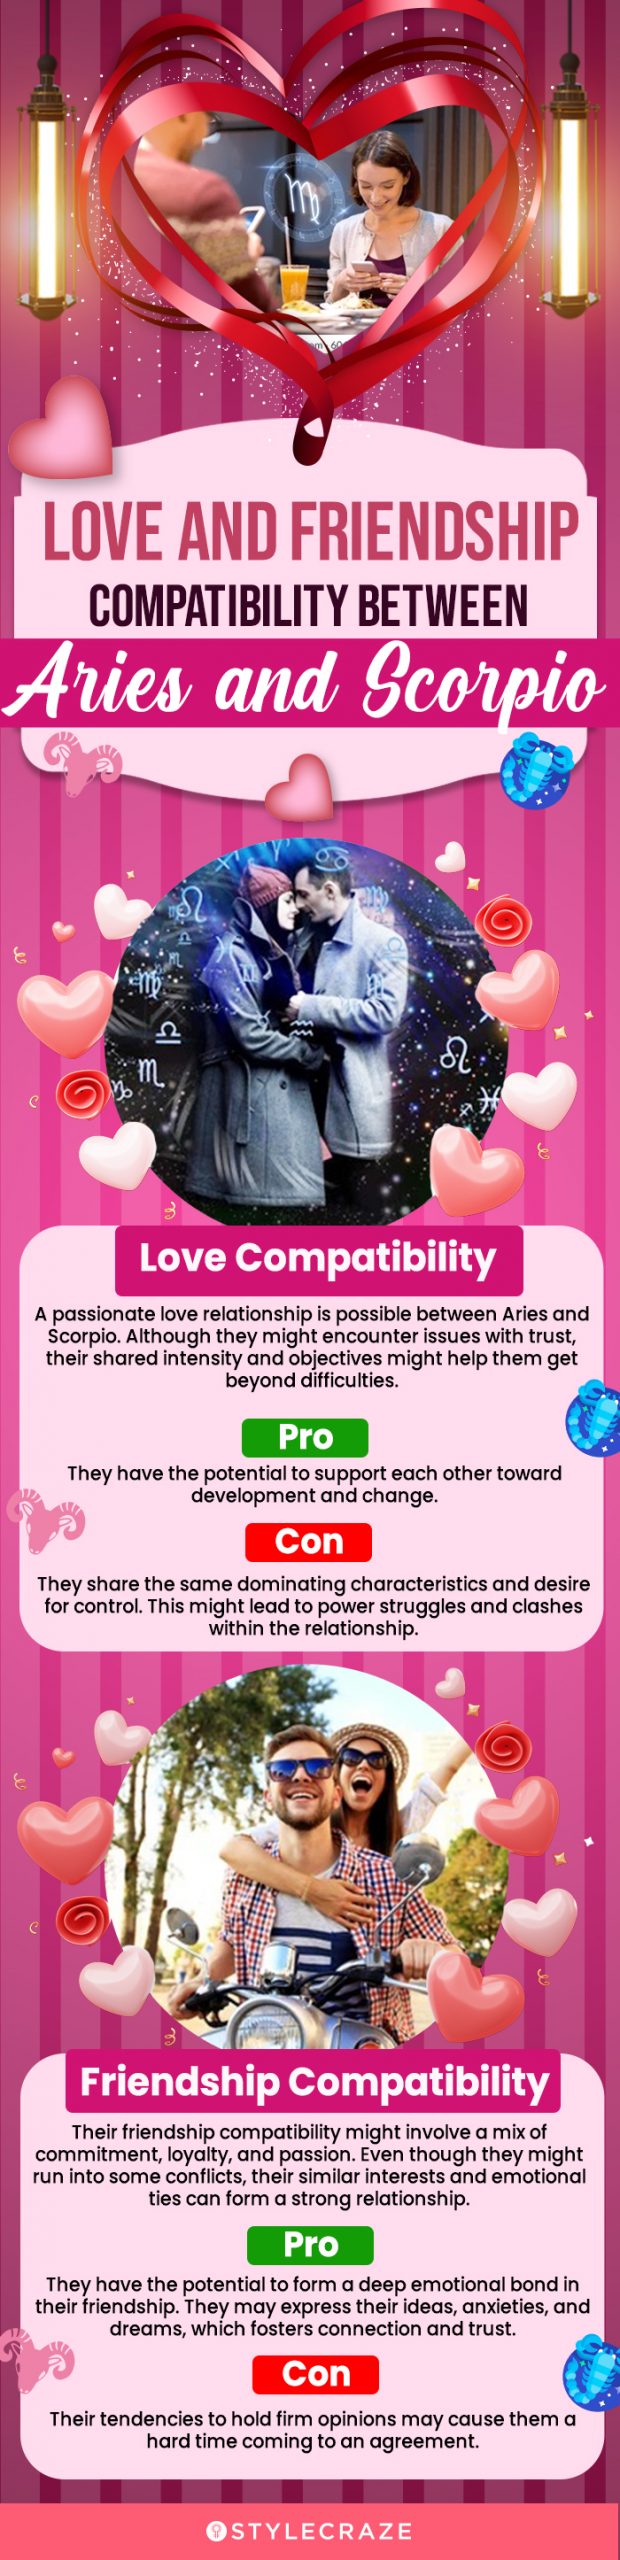 love and friendship compatibility between aries and scorpio(infographic)